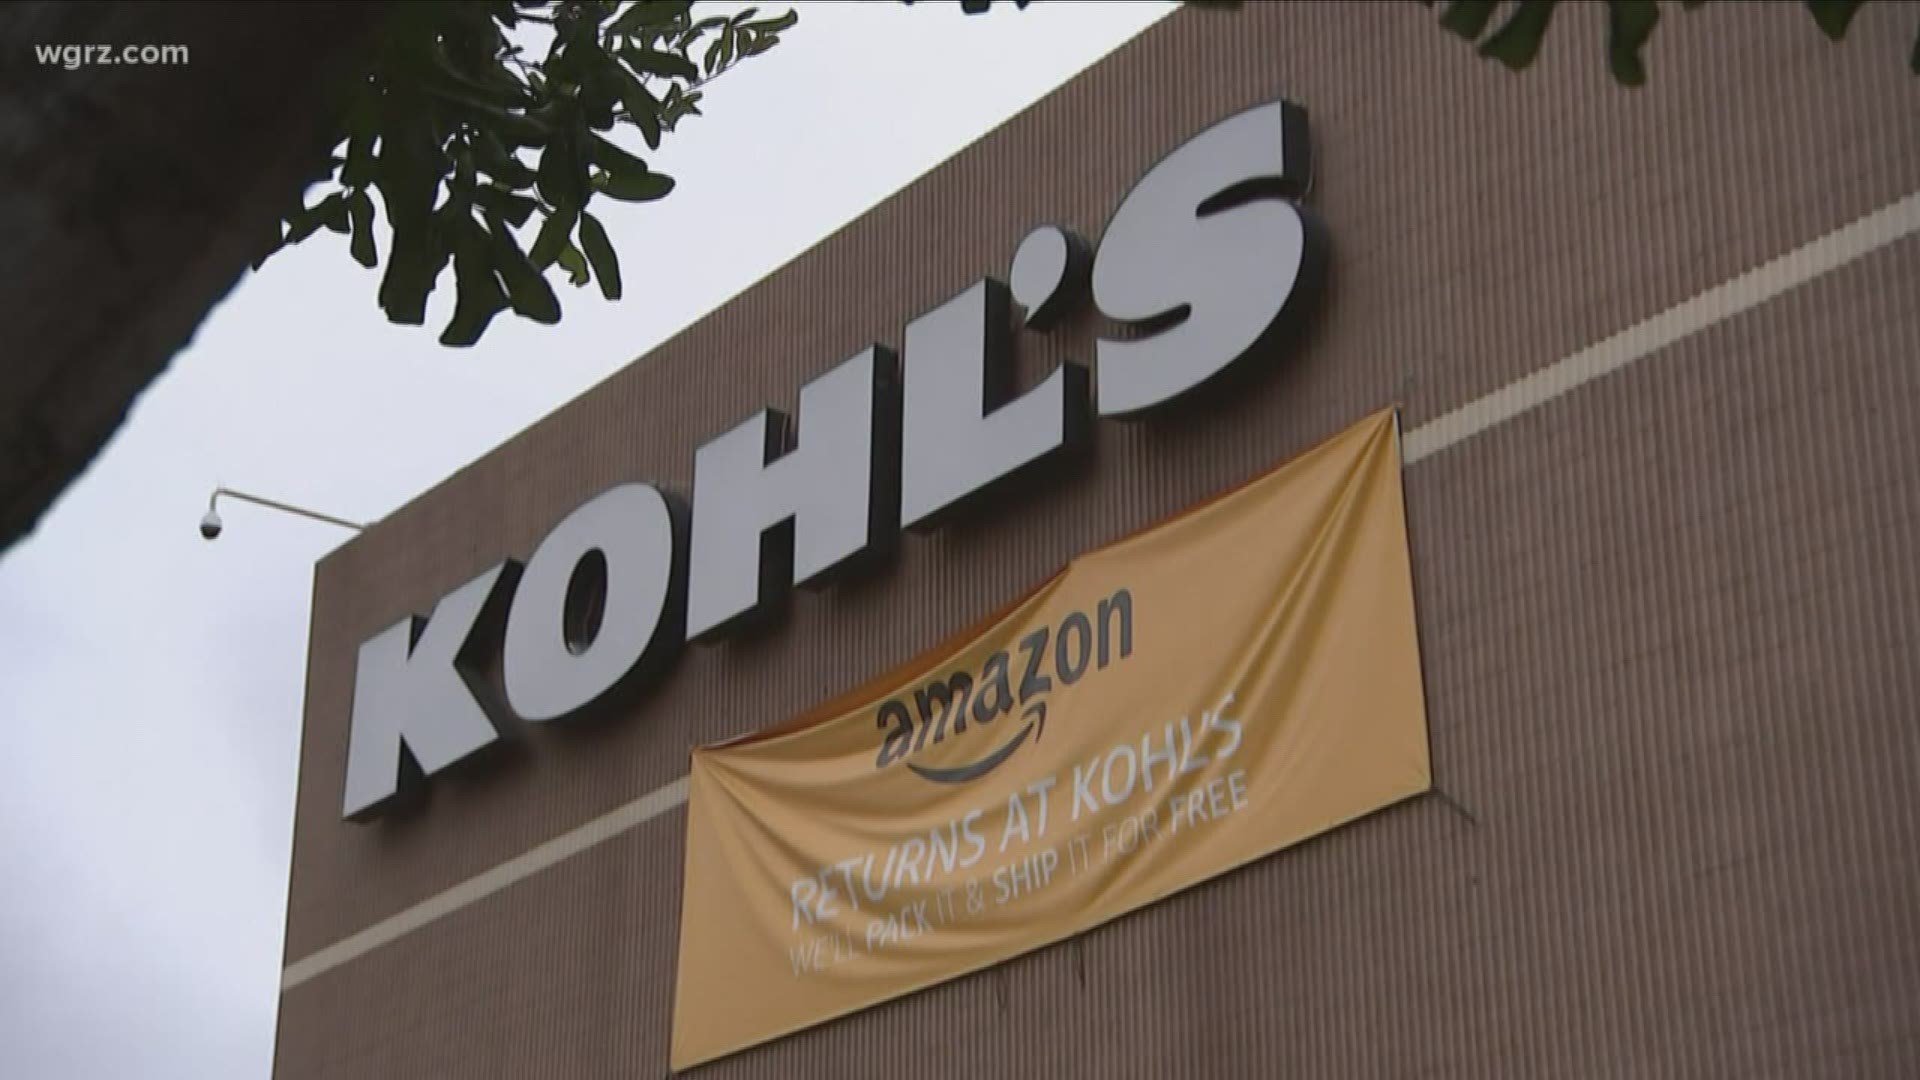 returns accepted at Kohl's